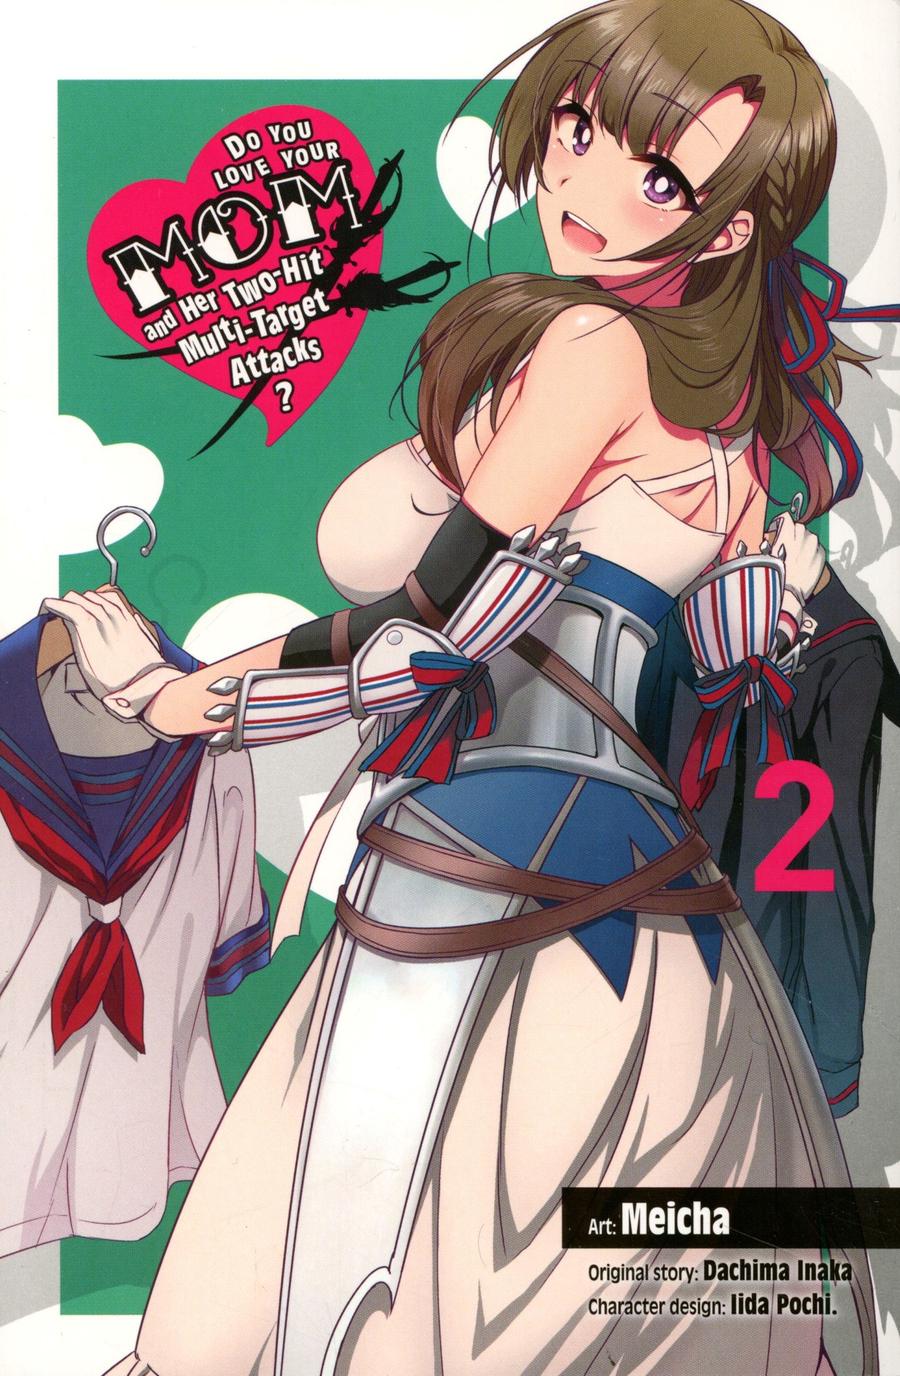 Do You Love Your Mom And Her Two-Hit Multi-Target Attacks Vol 2 GN